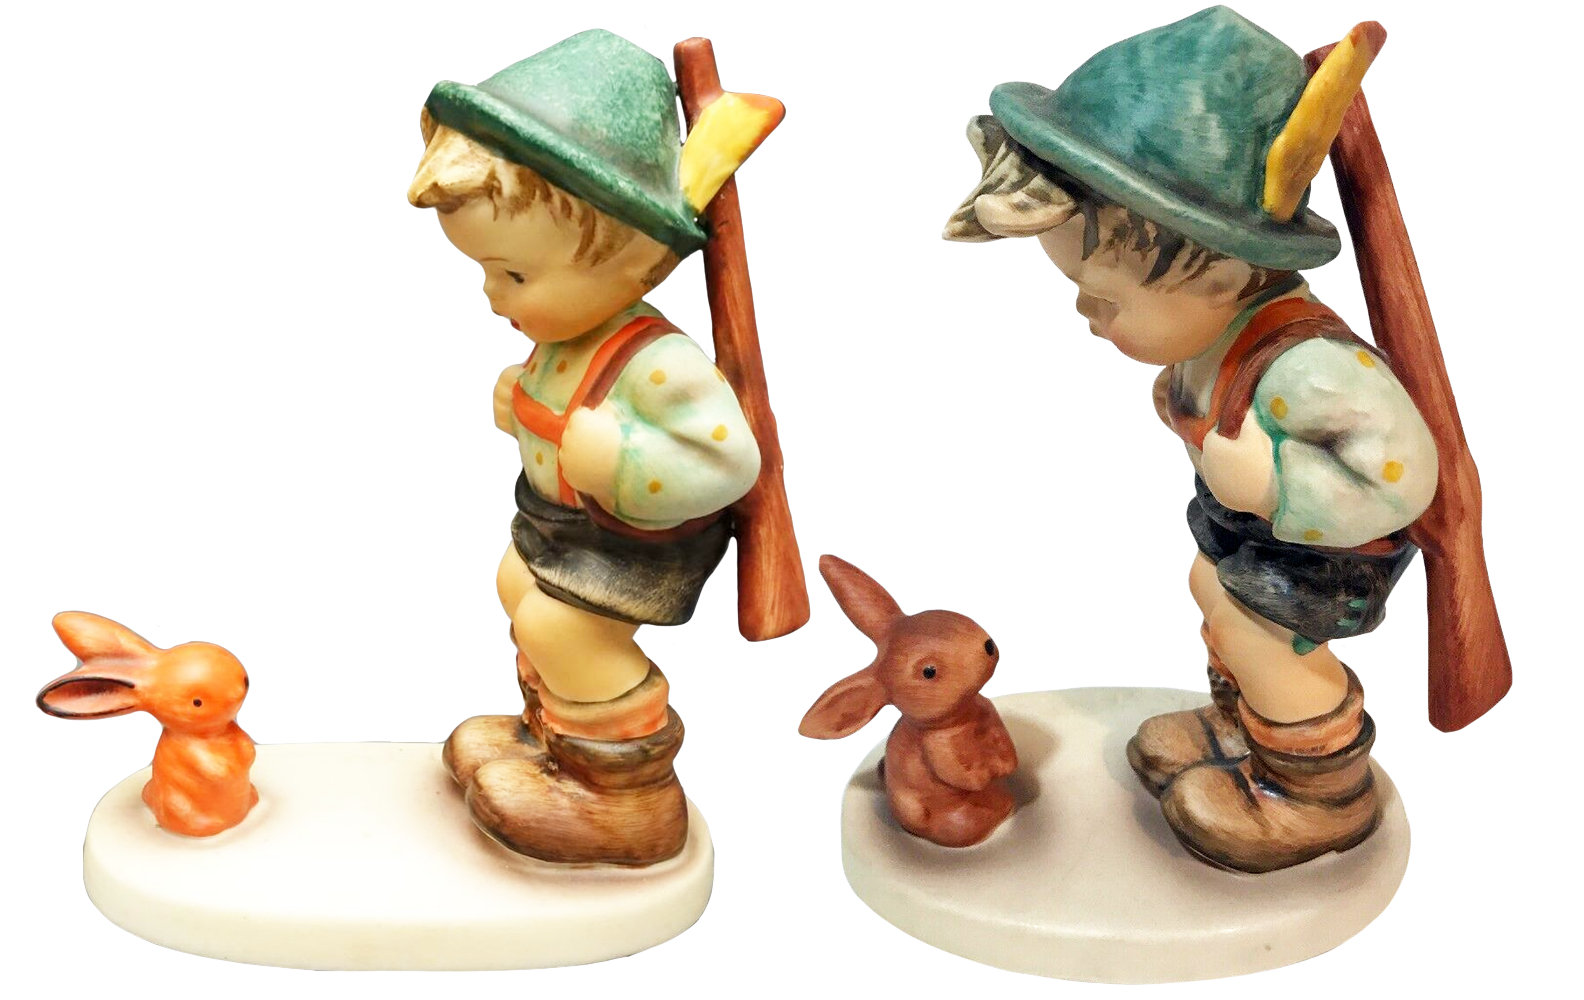 6 Most Valuable Hummel Figurines You'll Want to Know About